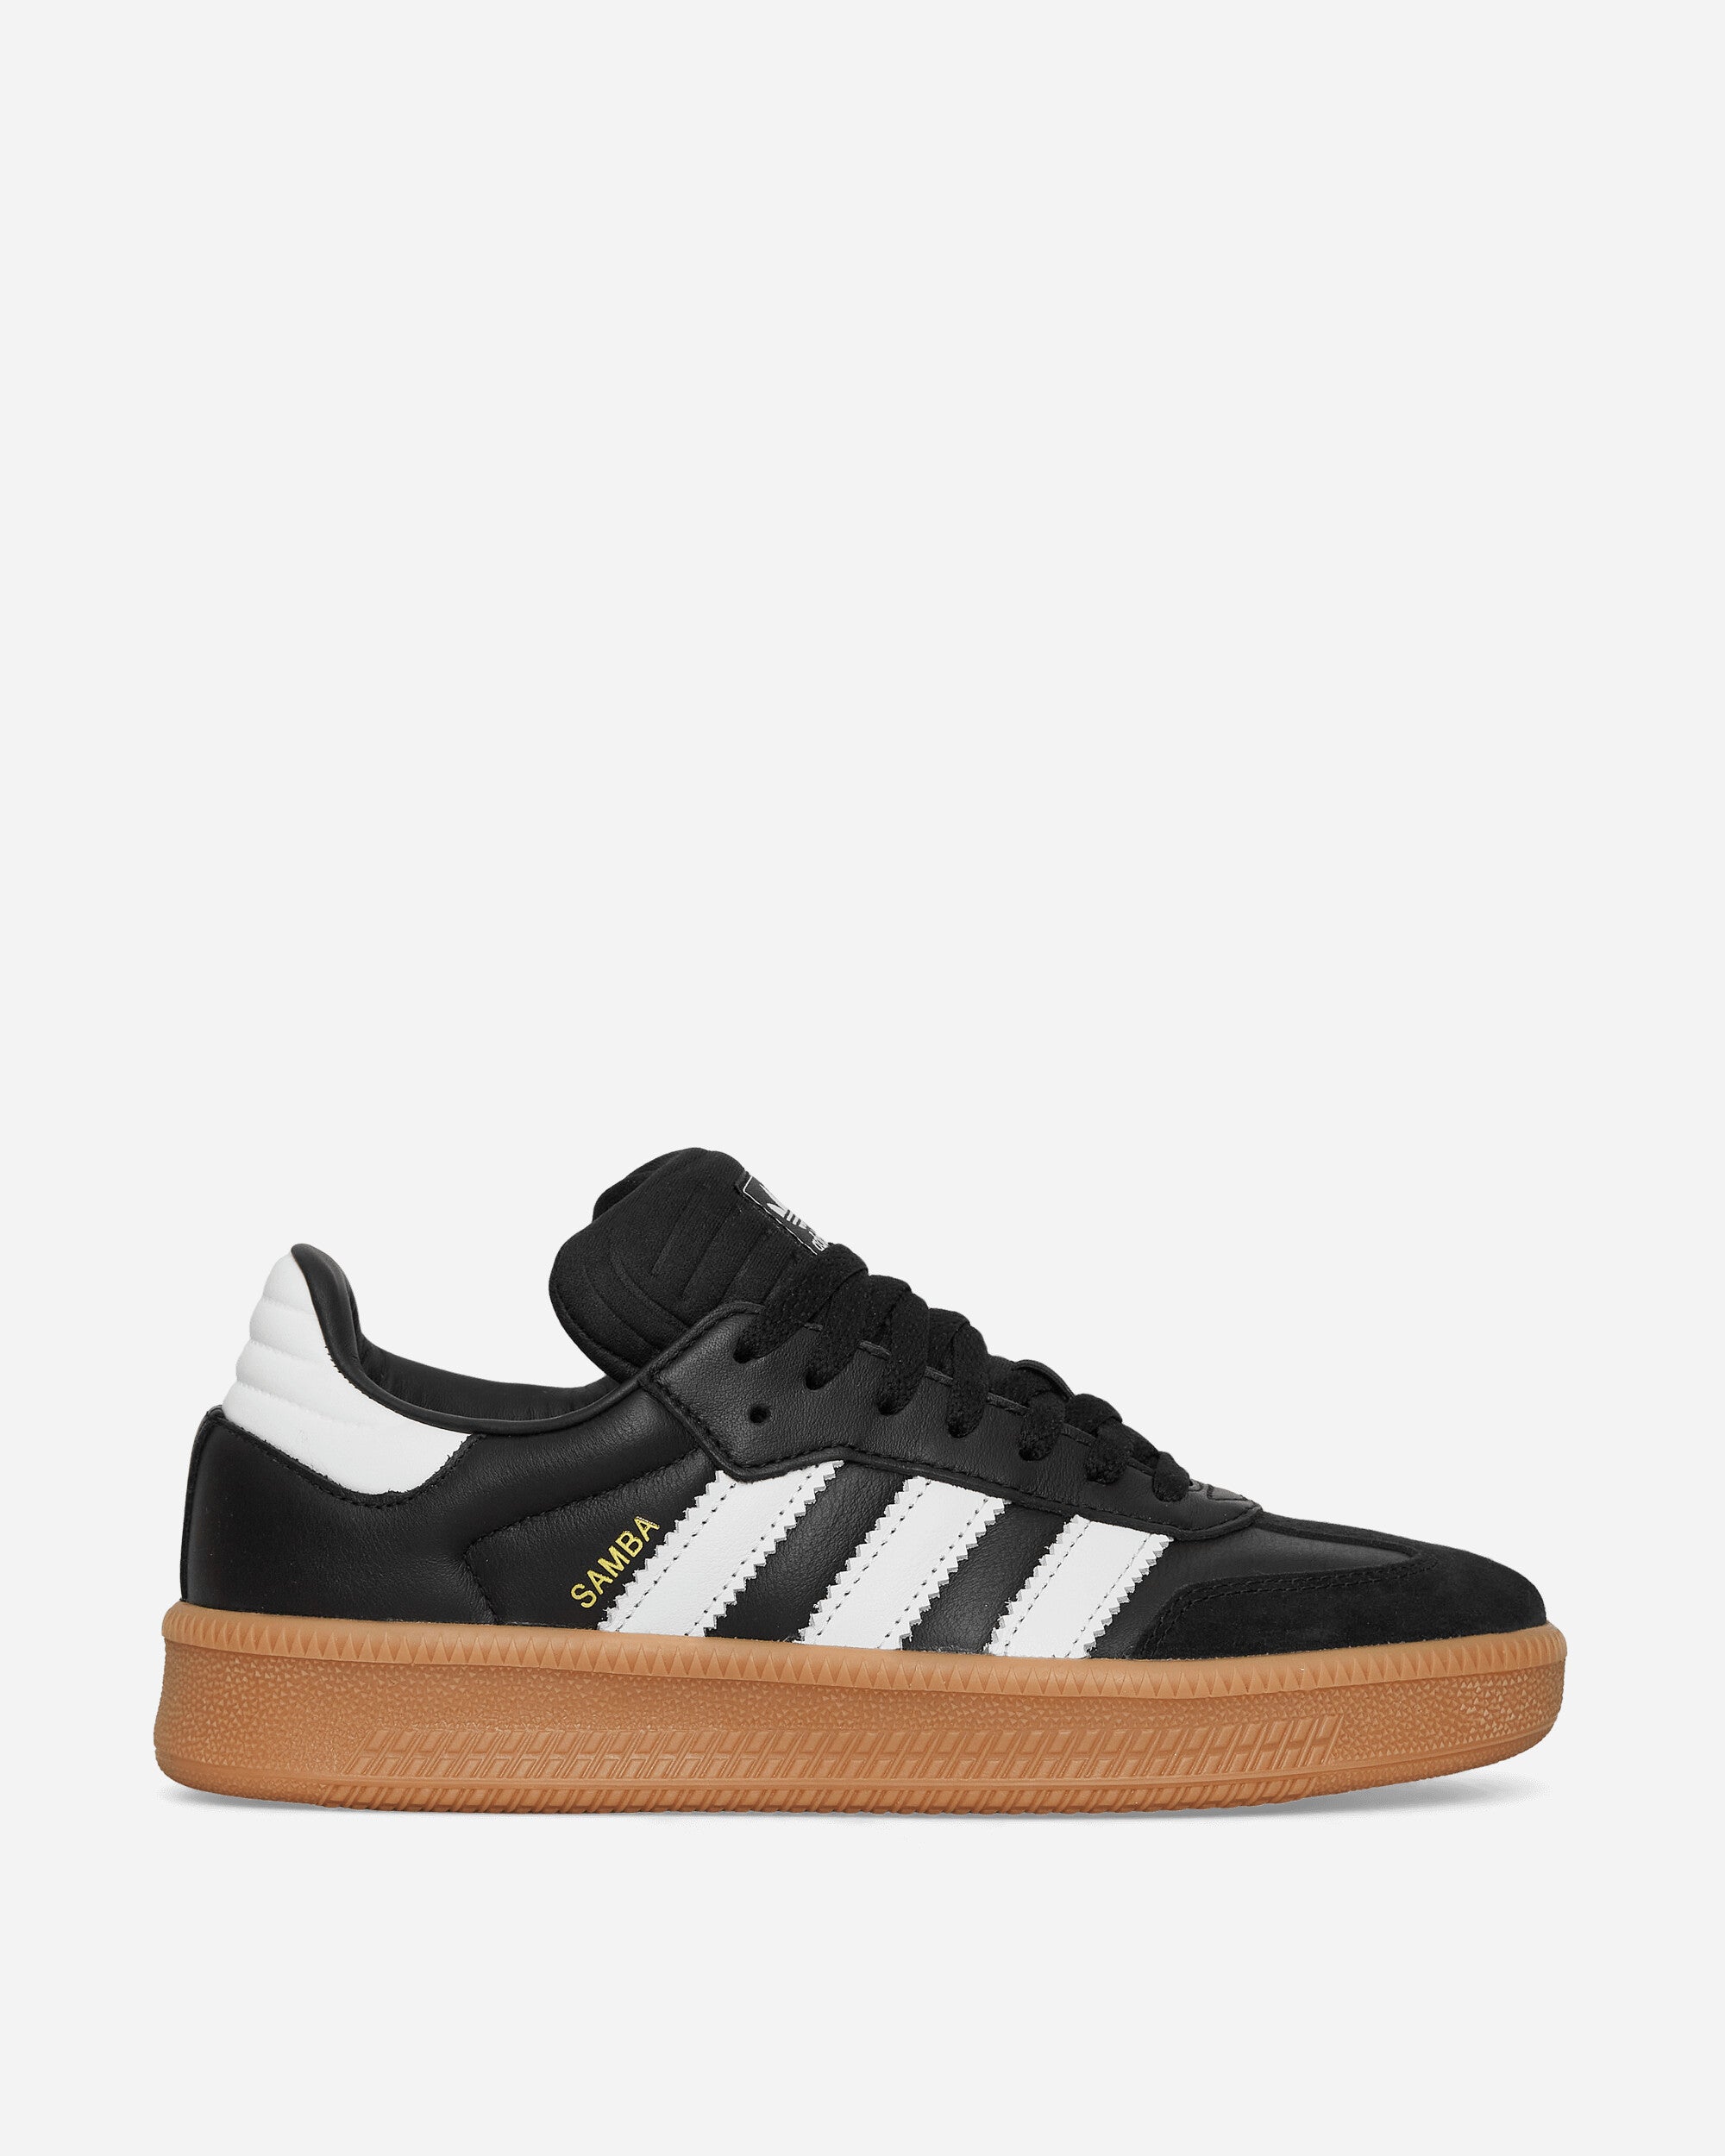 adidas Samba Xlg Core Black/Ftwr White Sneakers Low IE1379 001